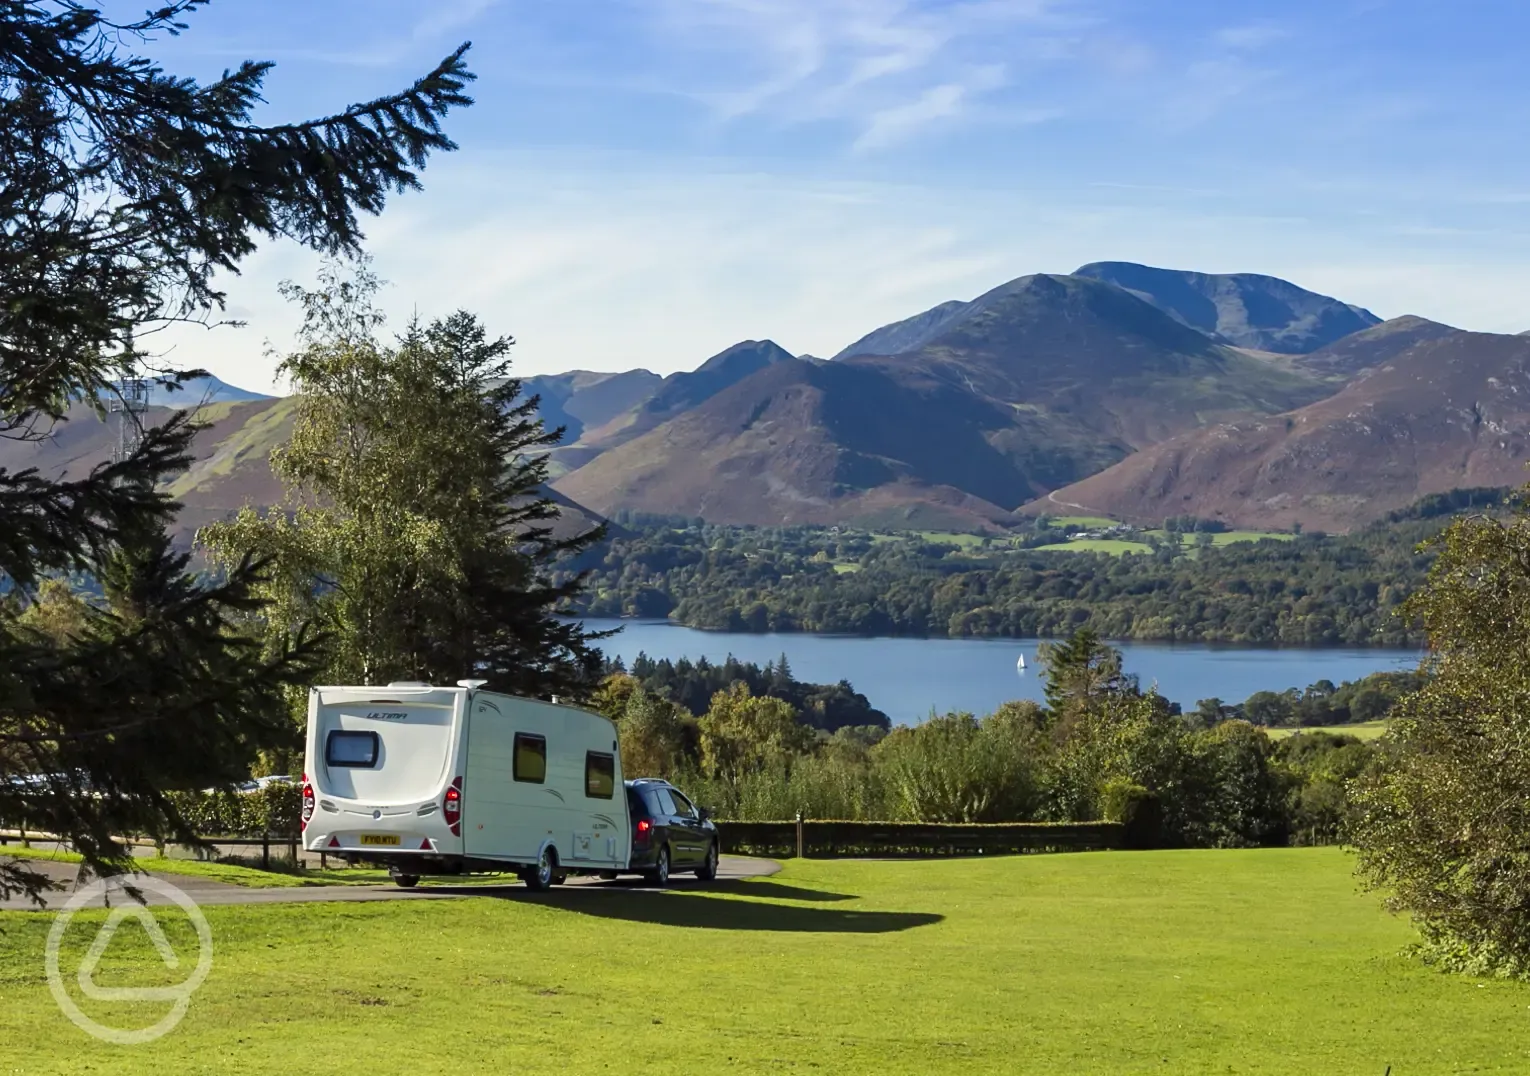 The view from Castlerigg Hall Caravan and Camping Park